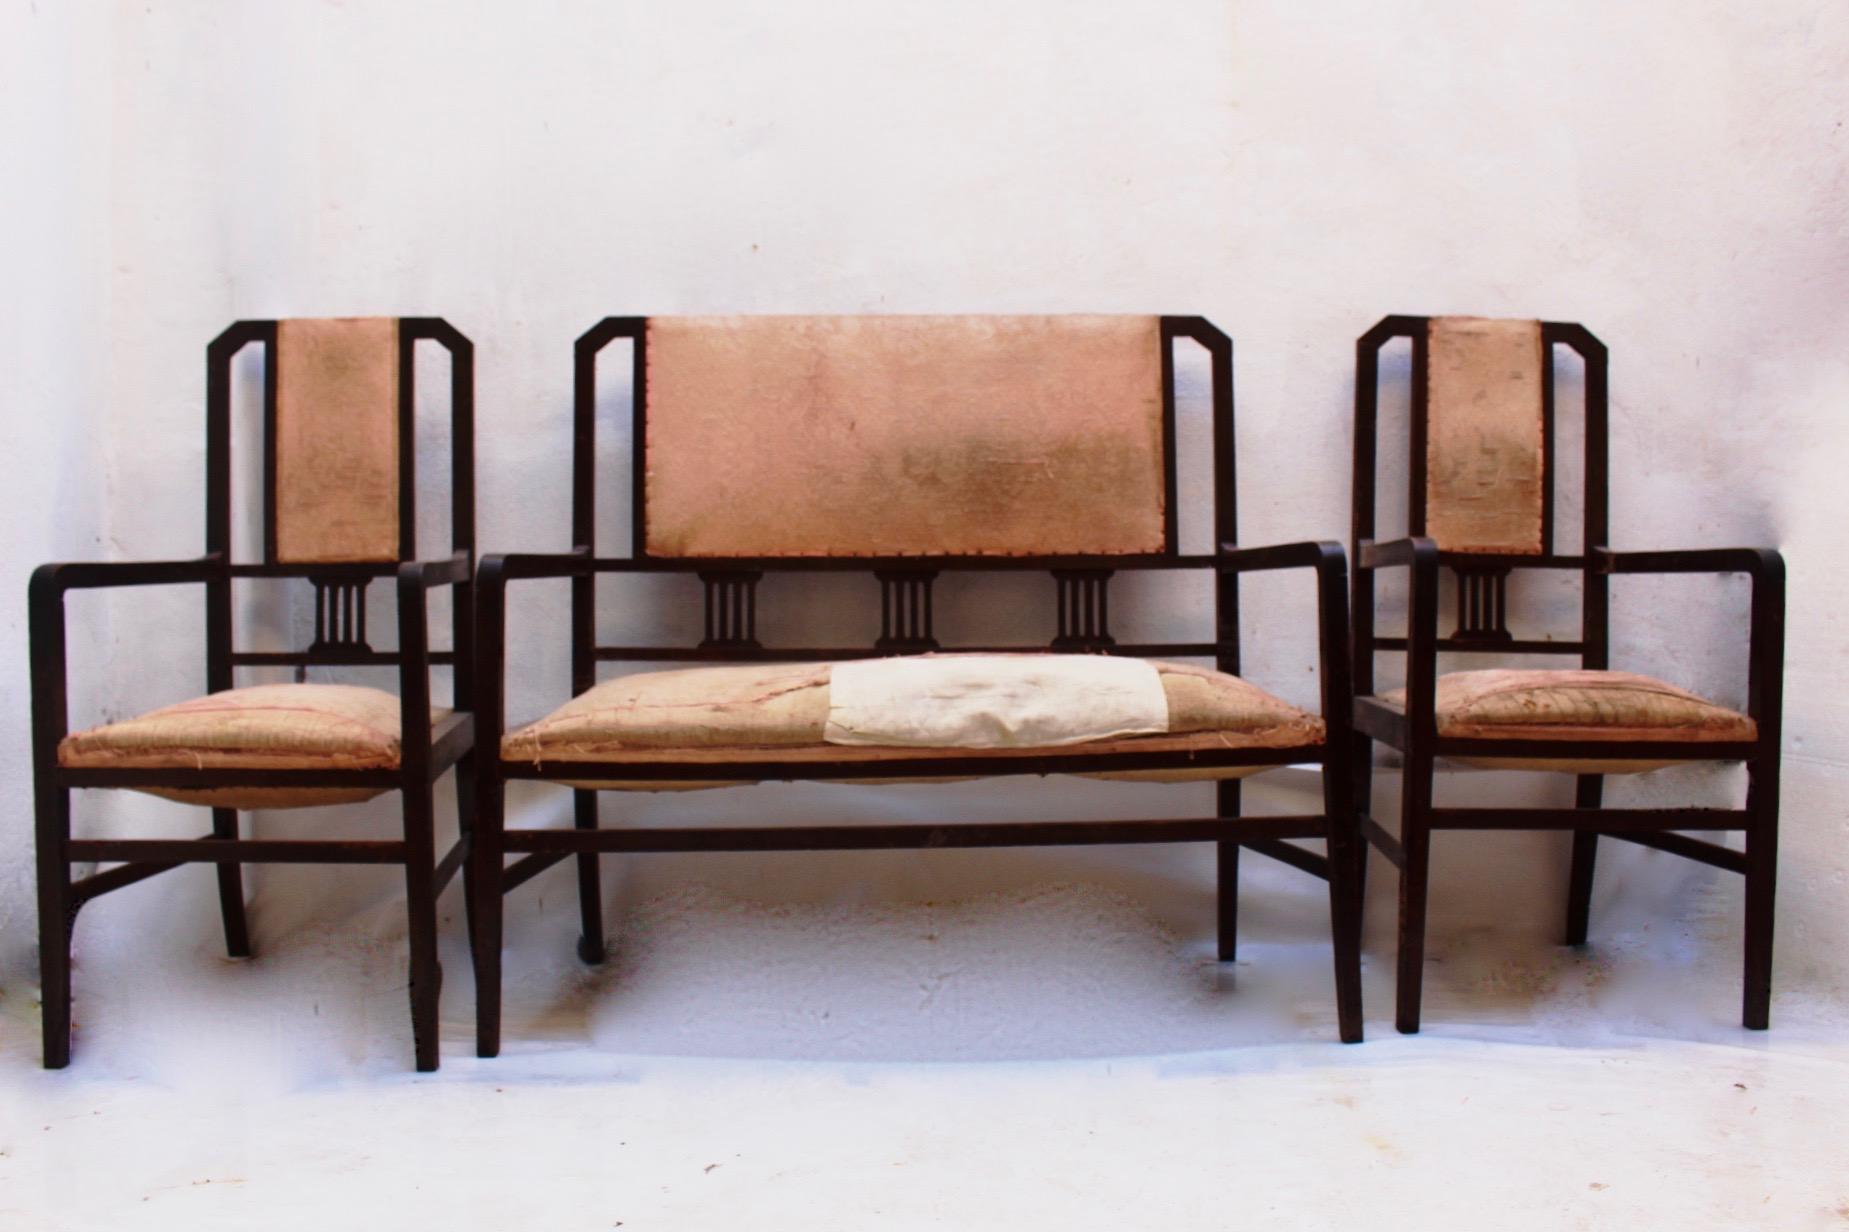 Art Deco Beech Living Room Set Settee and 4 Chairs, Spain, 1930s For Sale 11